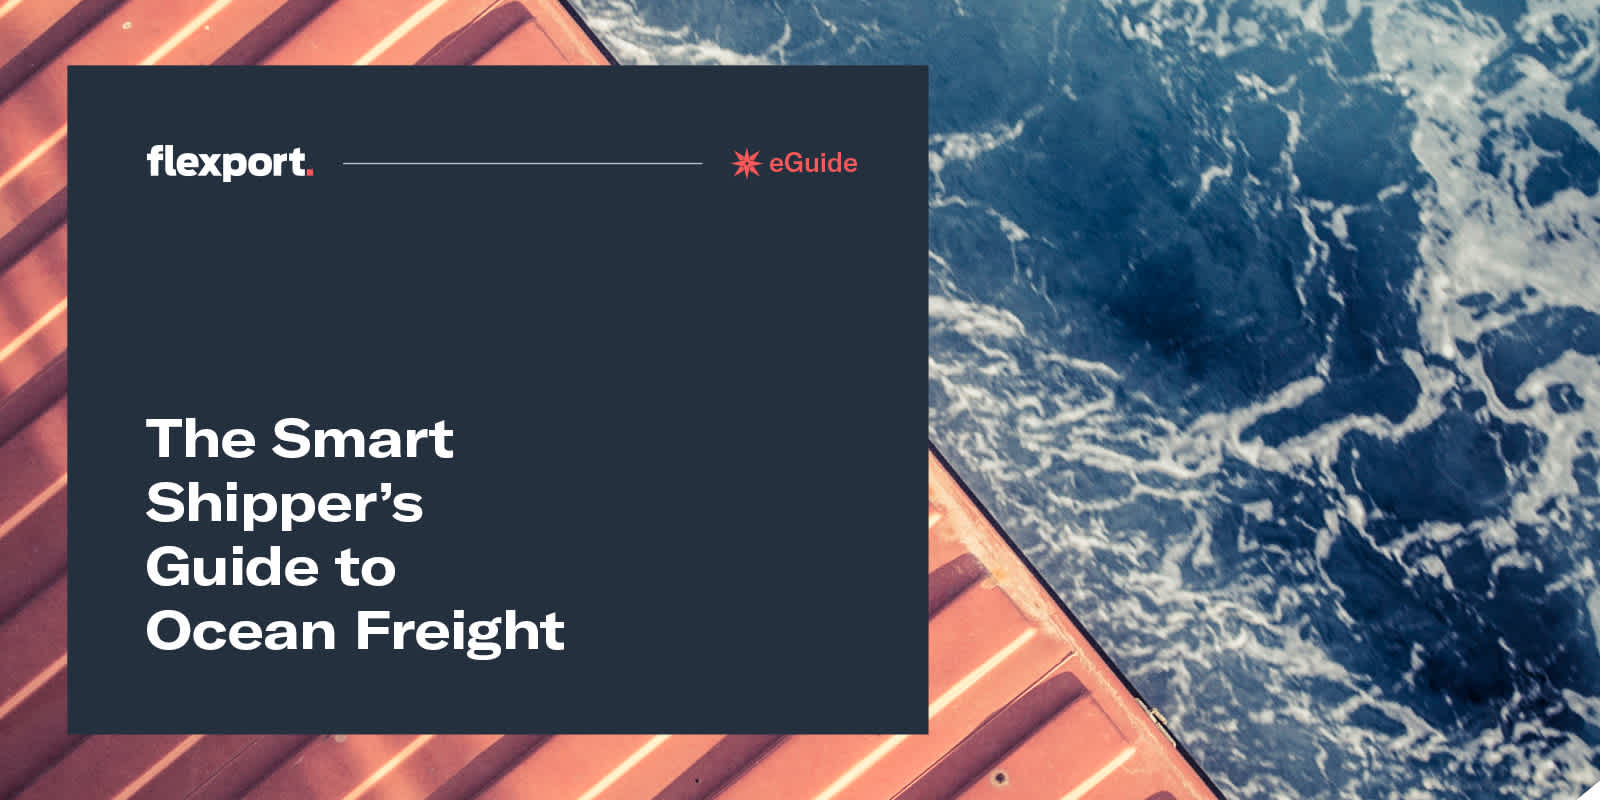 The Smart Shipper's Guide to Ocean Freight